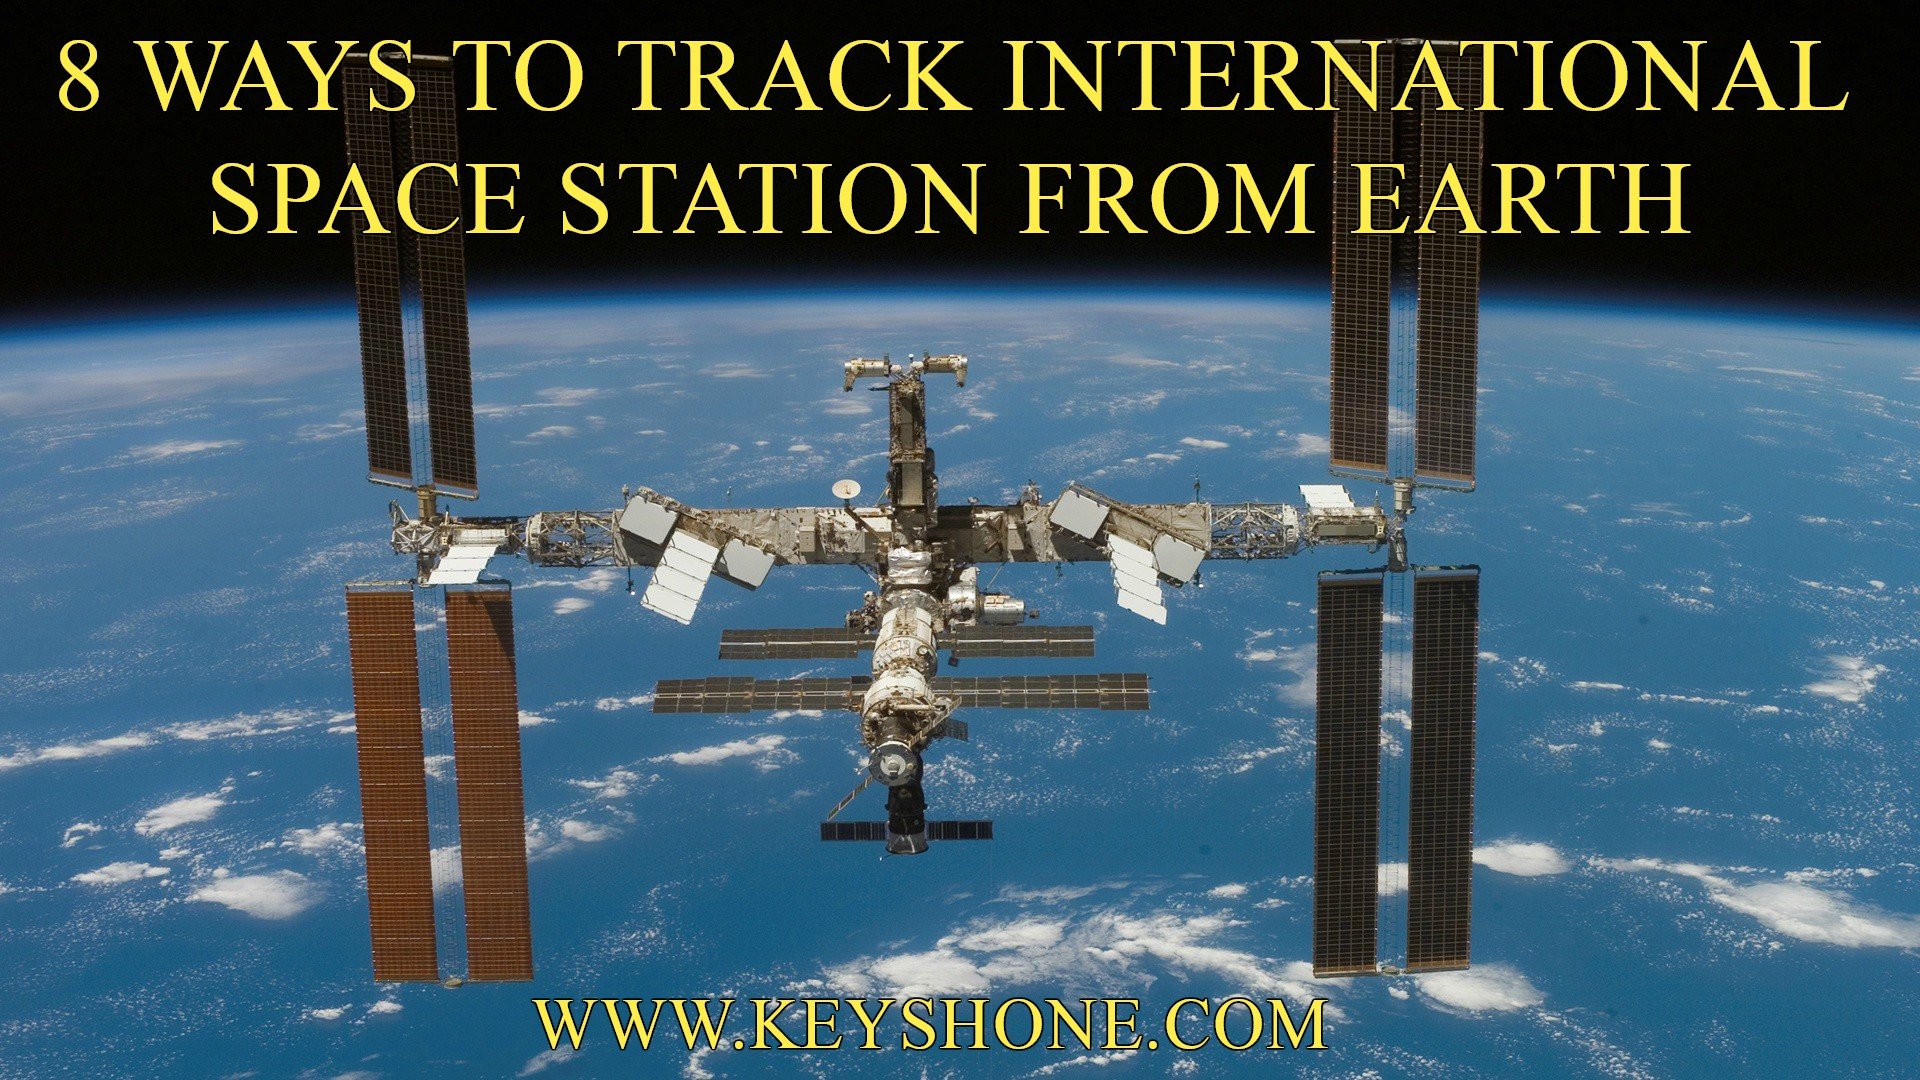 8 ways to track ISS or international space station from earth